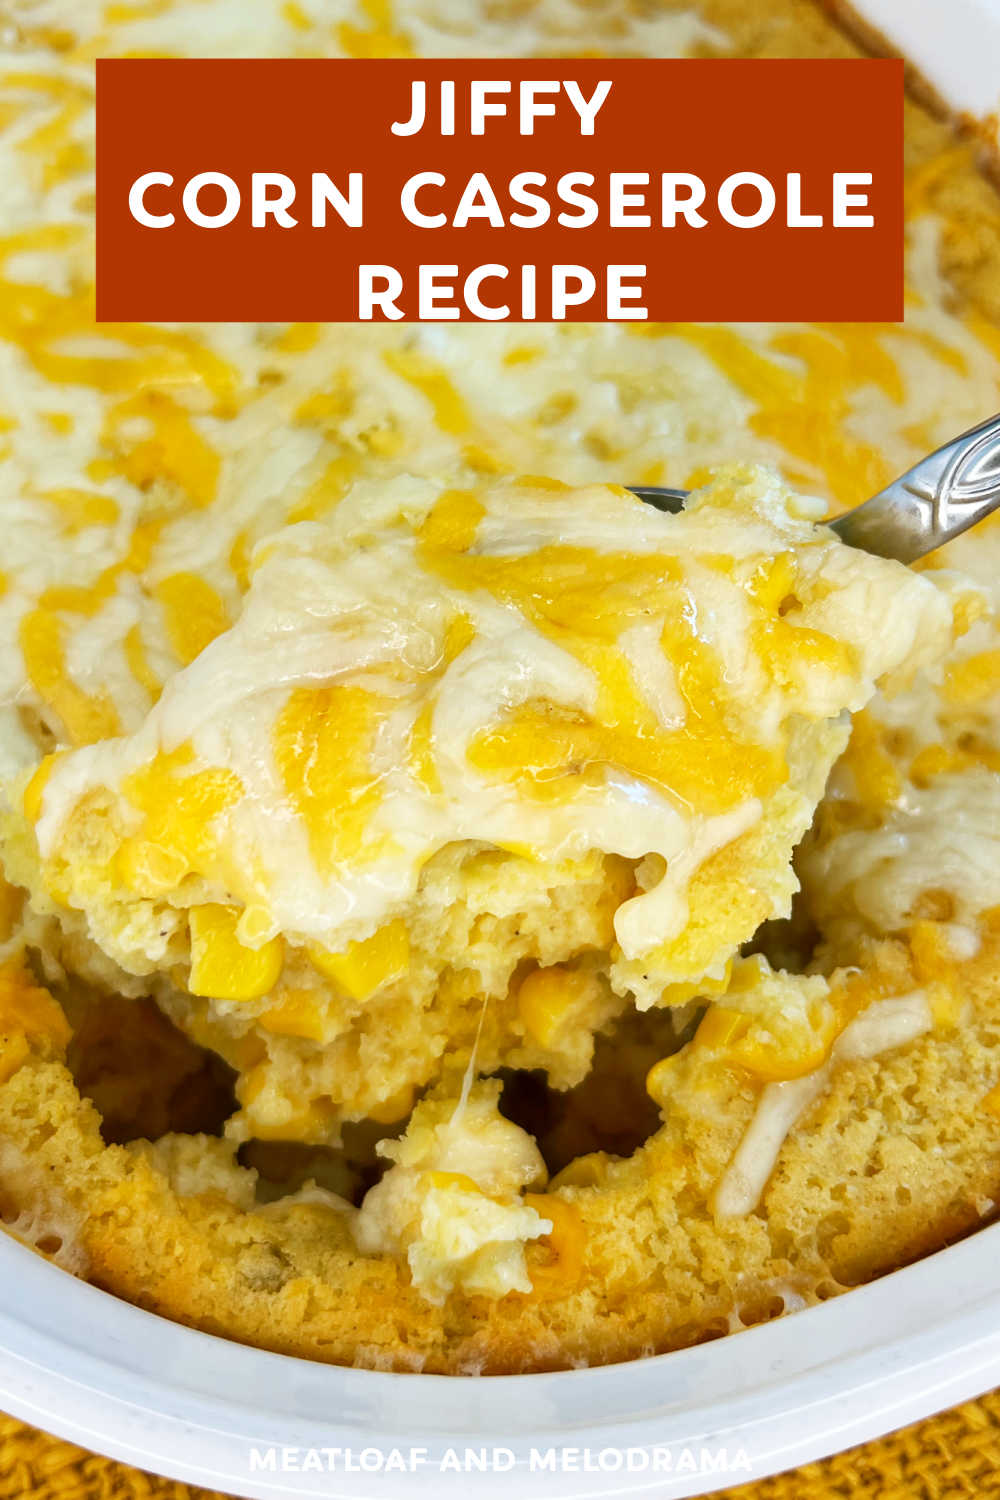 Jiffy Corn Casserole or corn pudding is an easy recipe made with Jiffy corn muffin mix. The perfect side dish for any holiday meal and a family favorite! This corn pudding recipe has green chiles and cheese for extra flavor! via @meamel